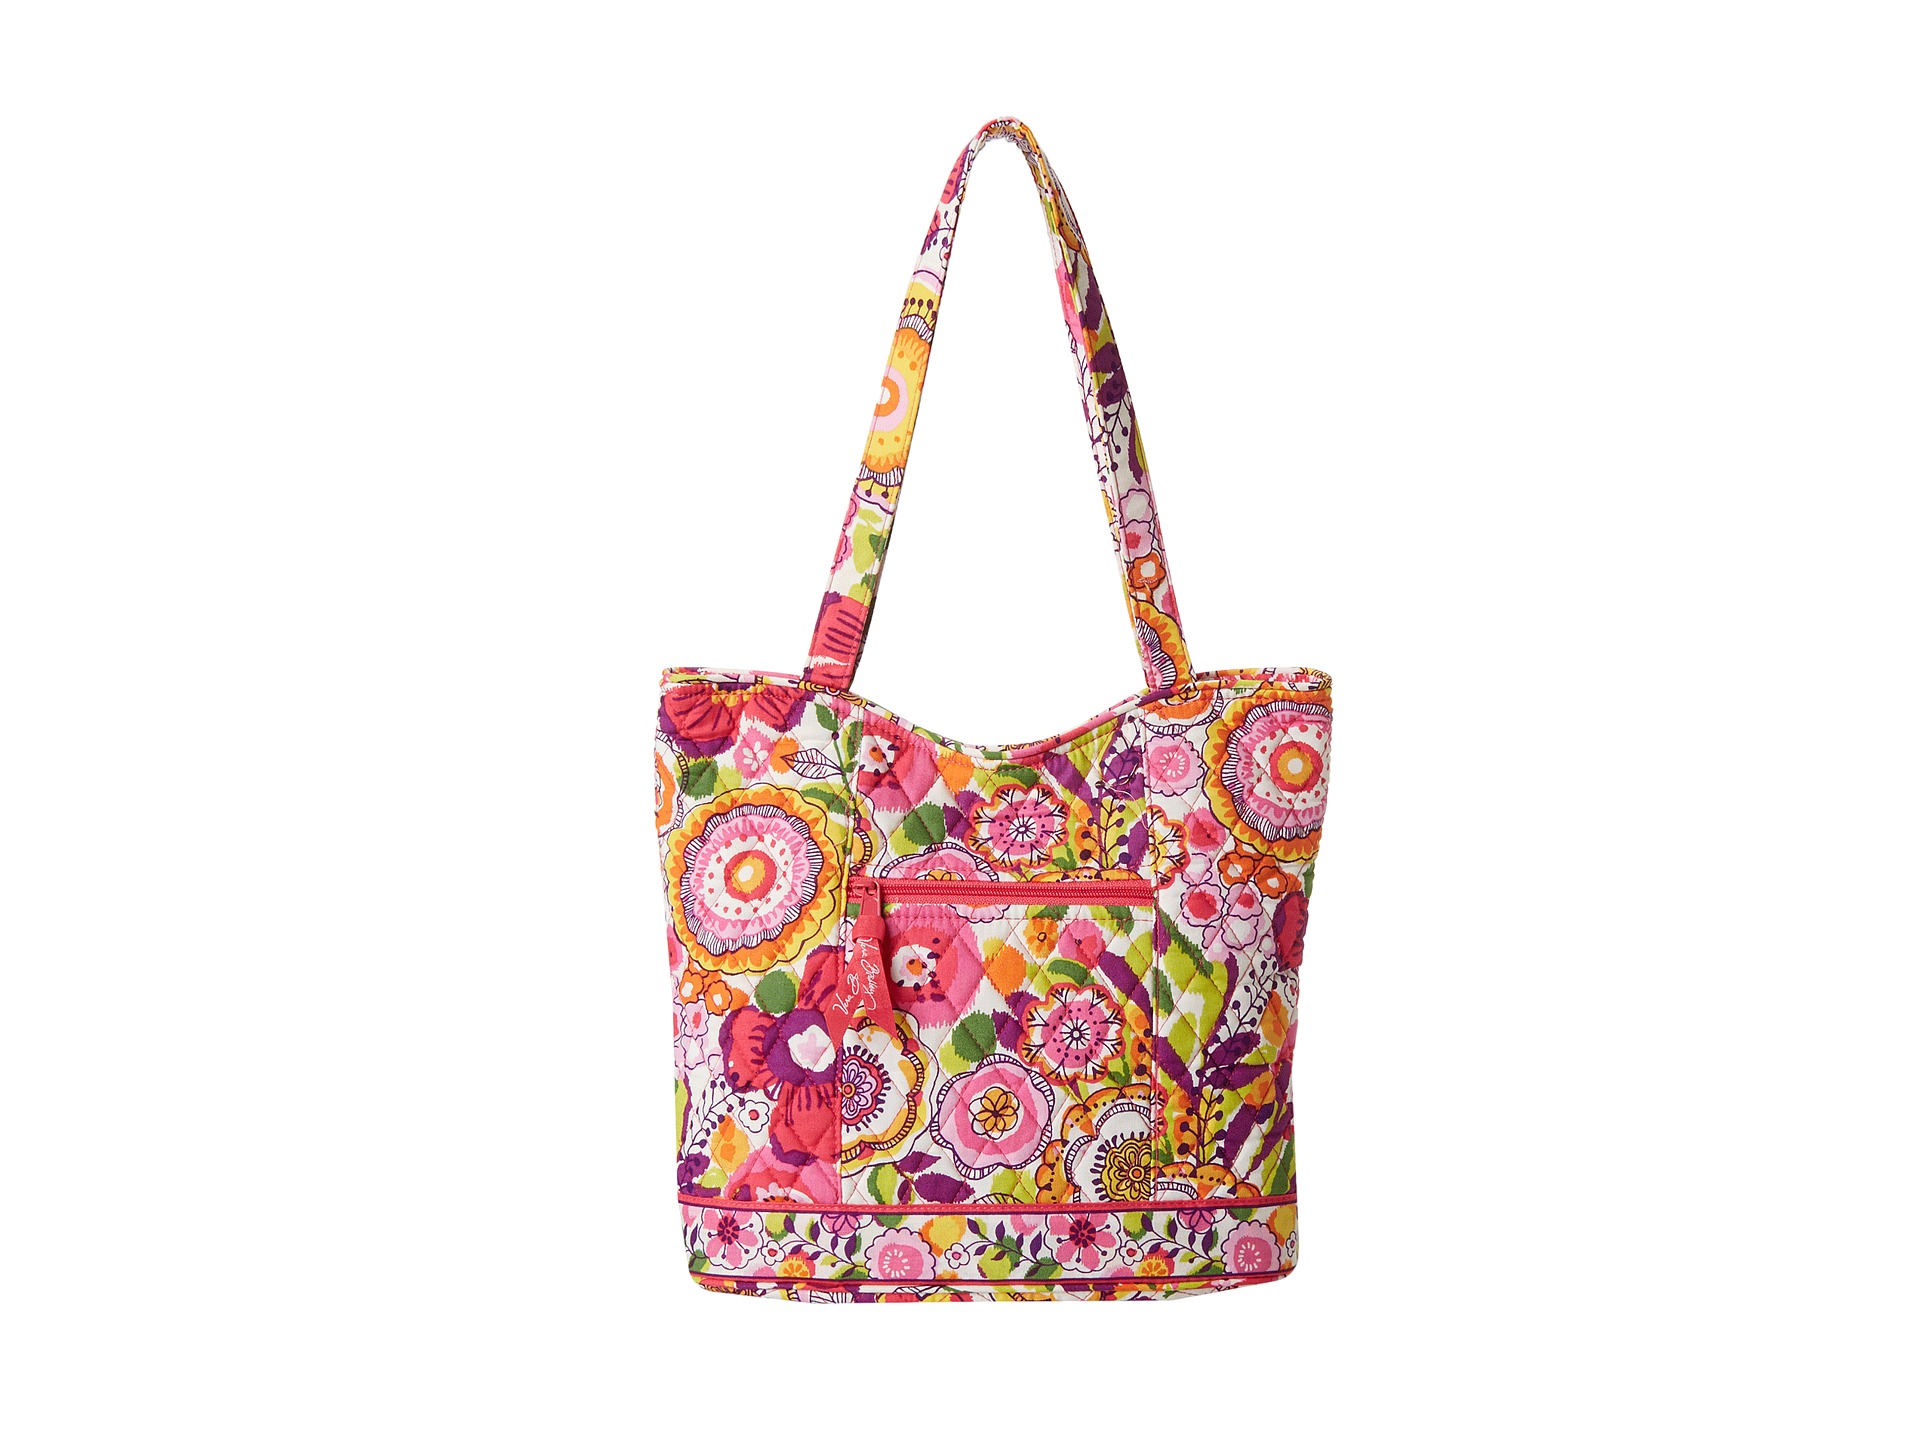 Vera Bradley Bucket Tote Clementine, Bags, Women | Shipped Free at Zappos